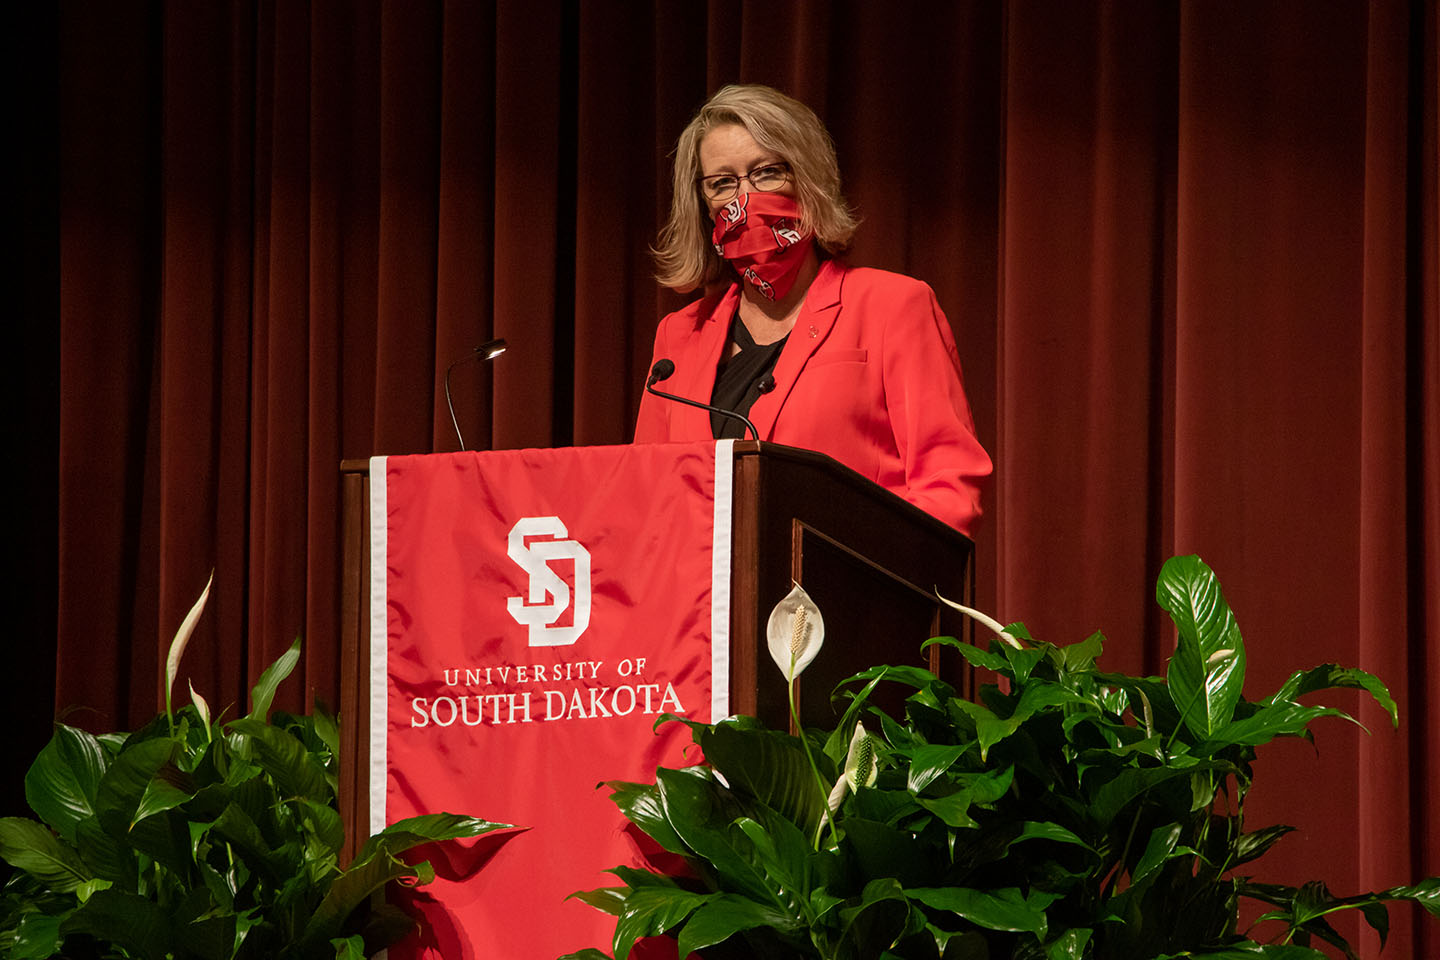 USD President discusses five-year plan at university address